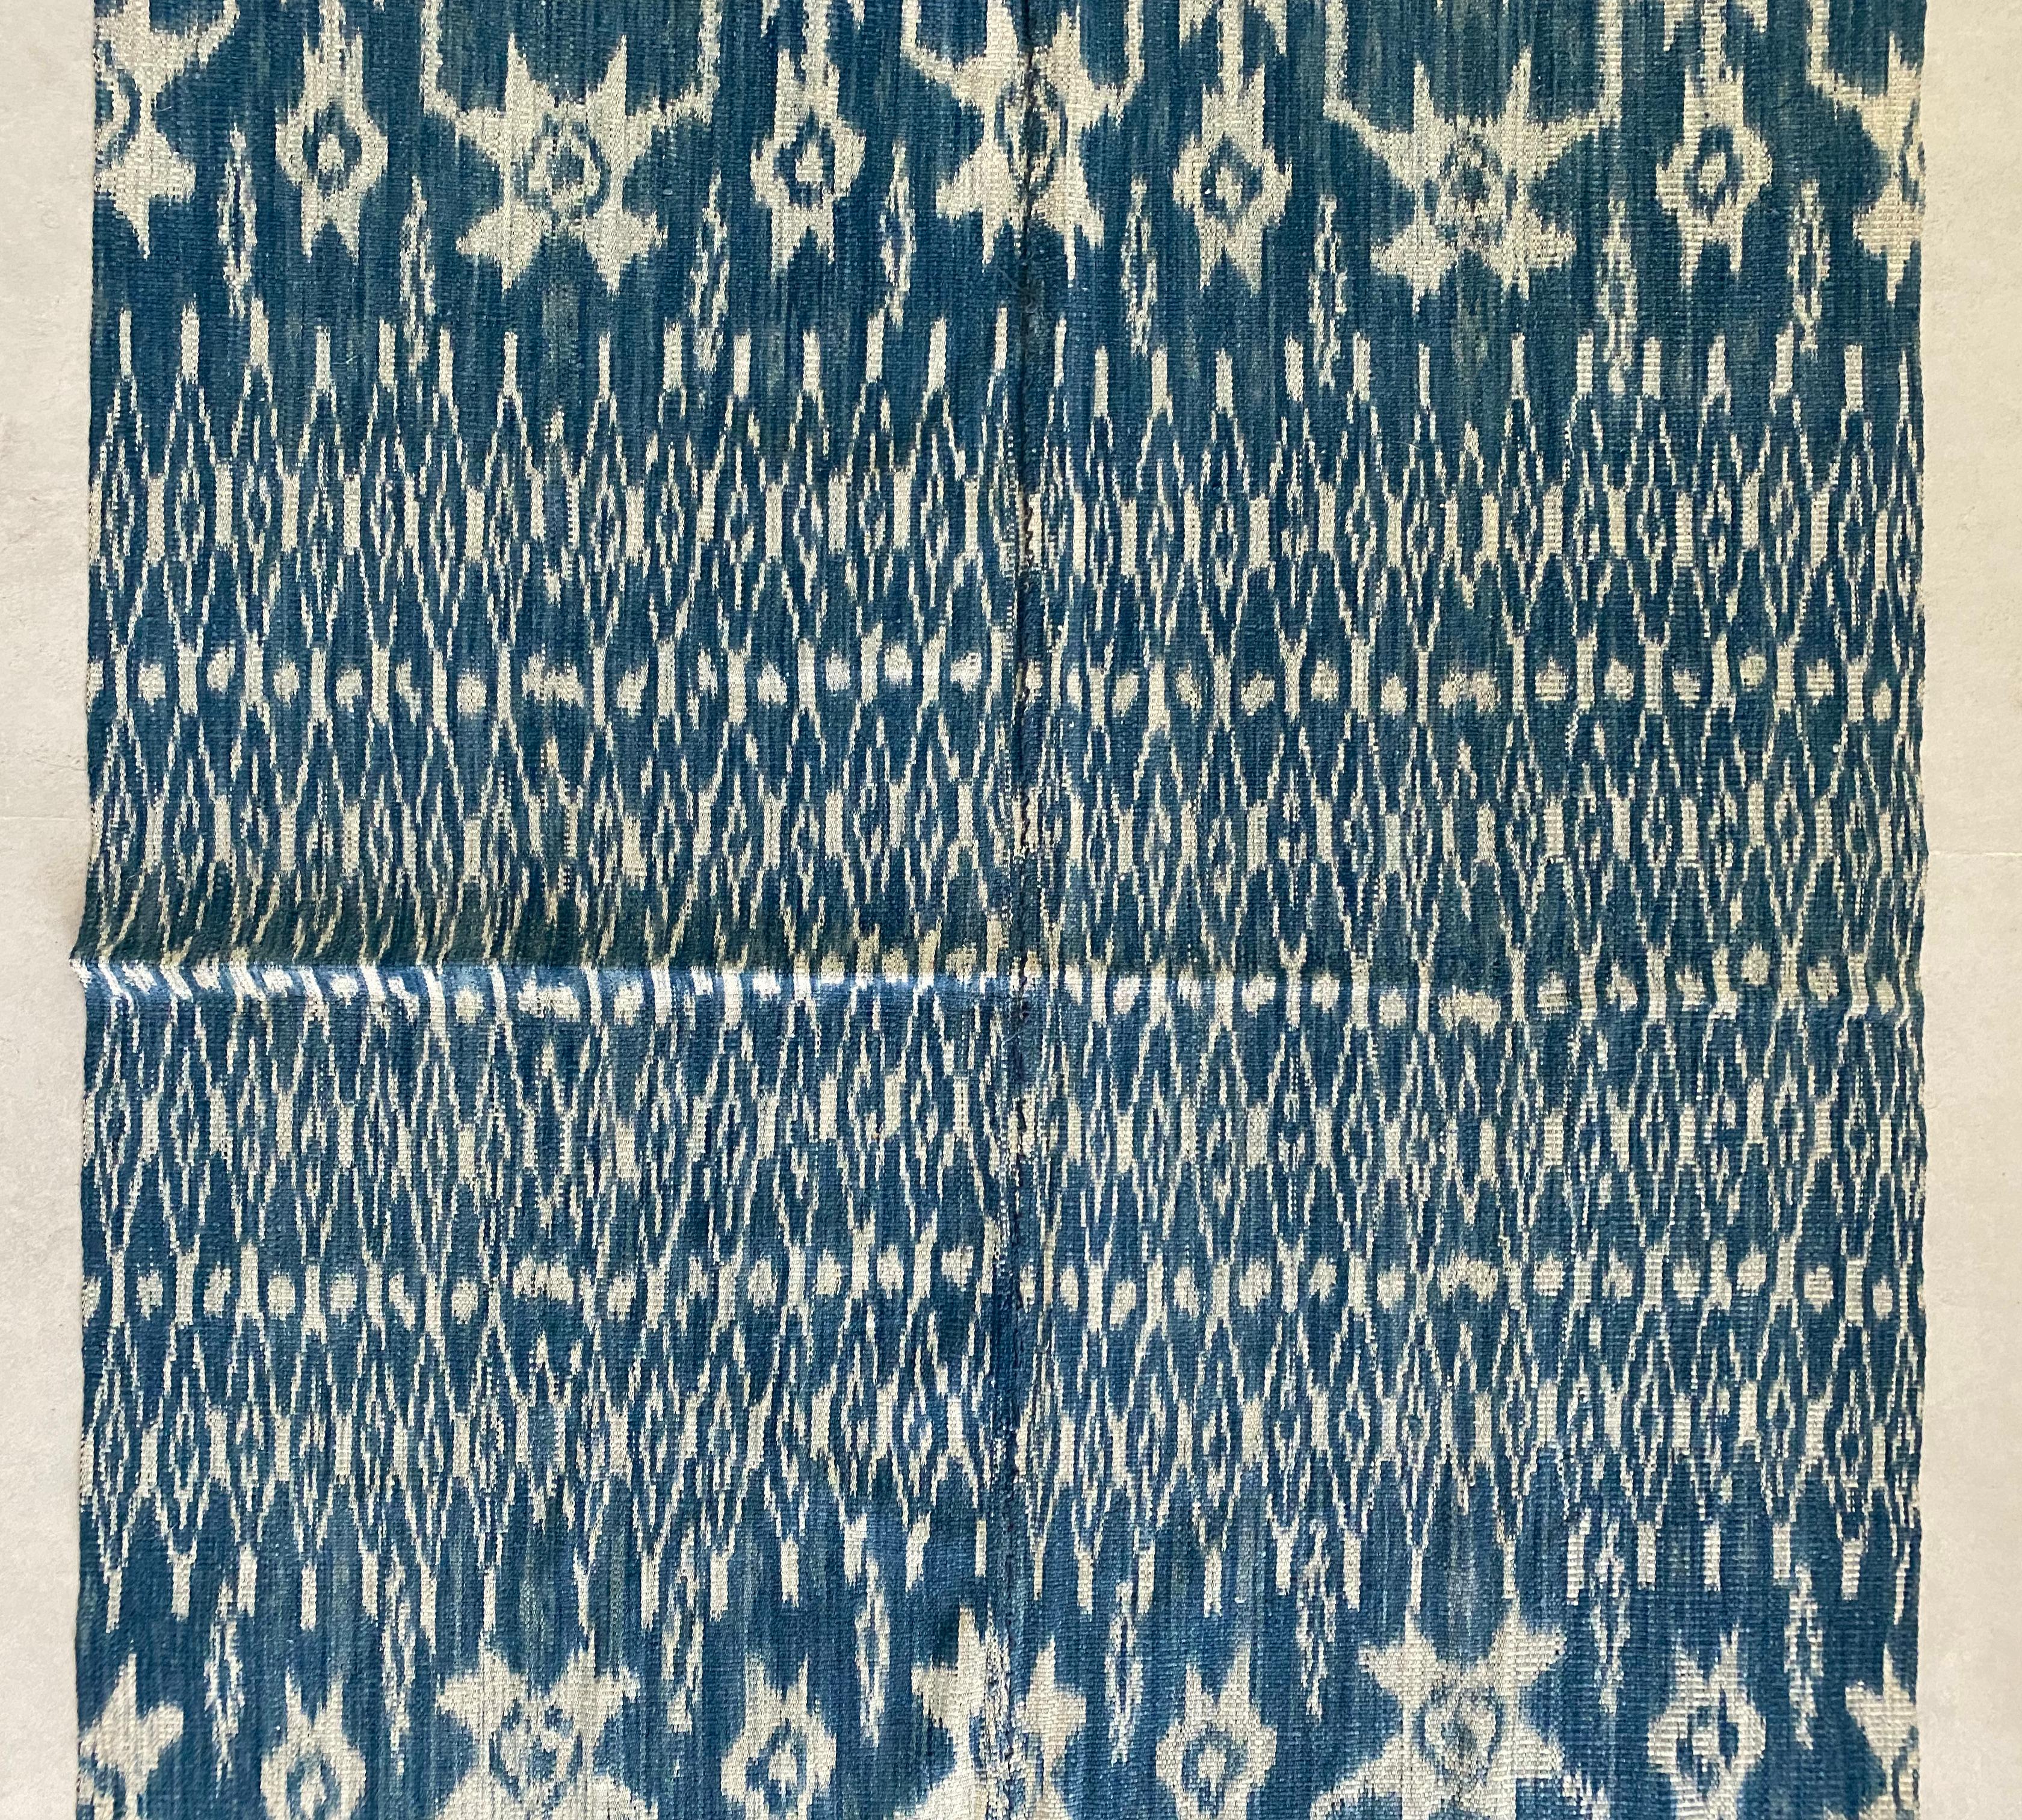 This Ikat textile originates from the Island of Sumba, Indonesia. It is hand-woven using naturally dyed yarns via a method passed on through generations. It features a predominantly blue pigment with chicken motifs and distinct tribal patterns.